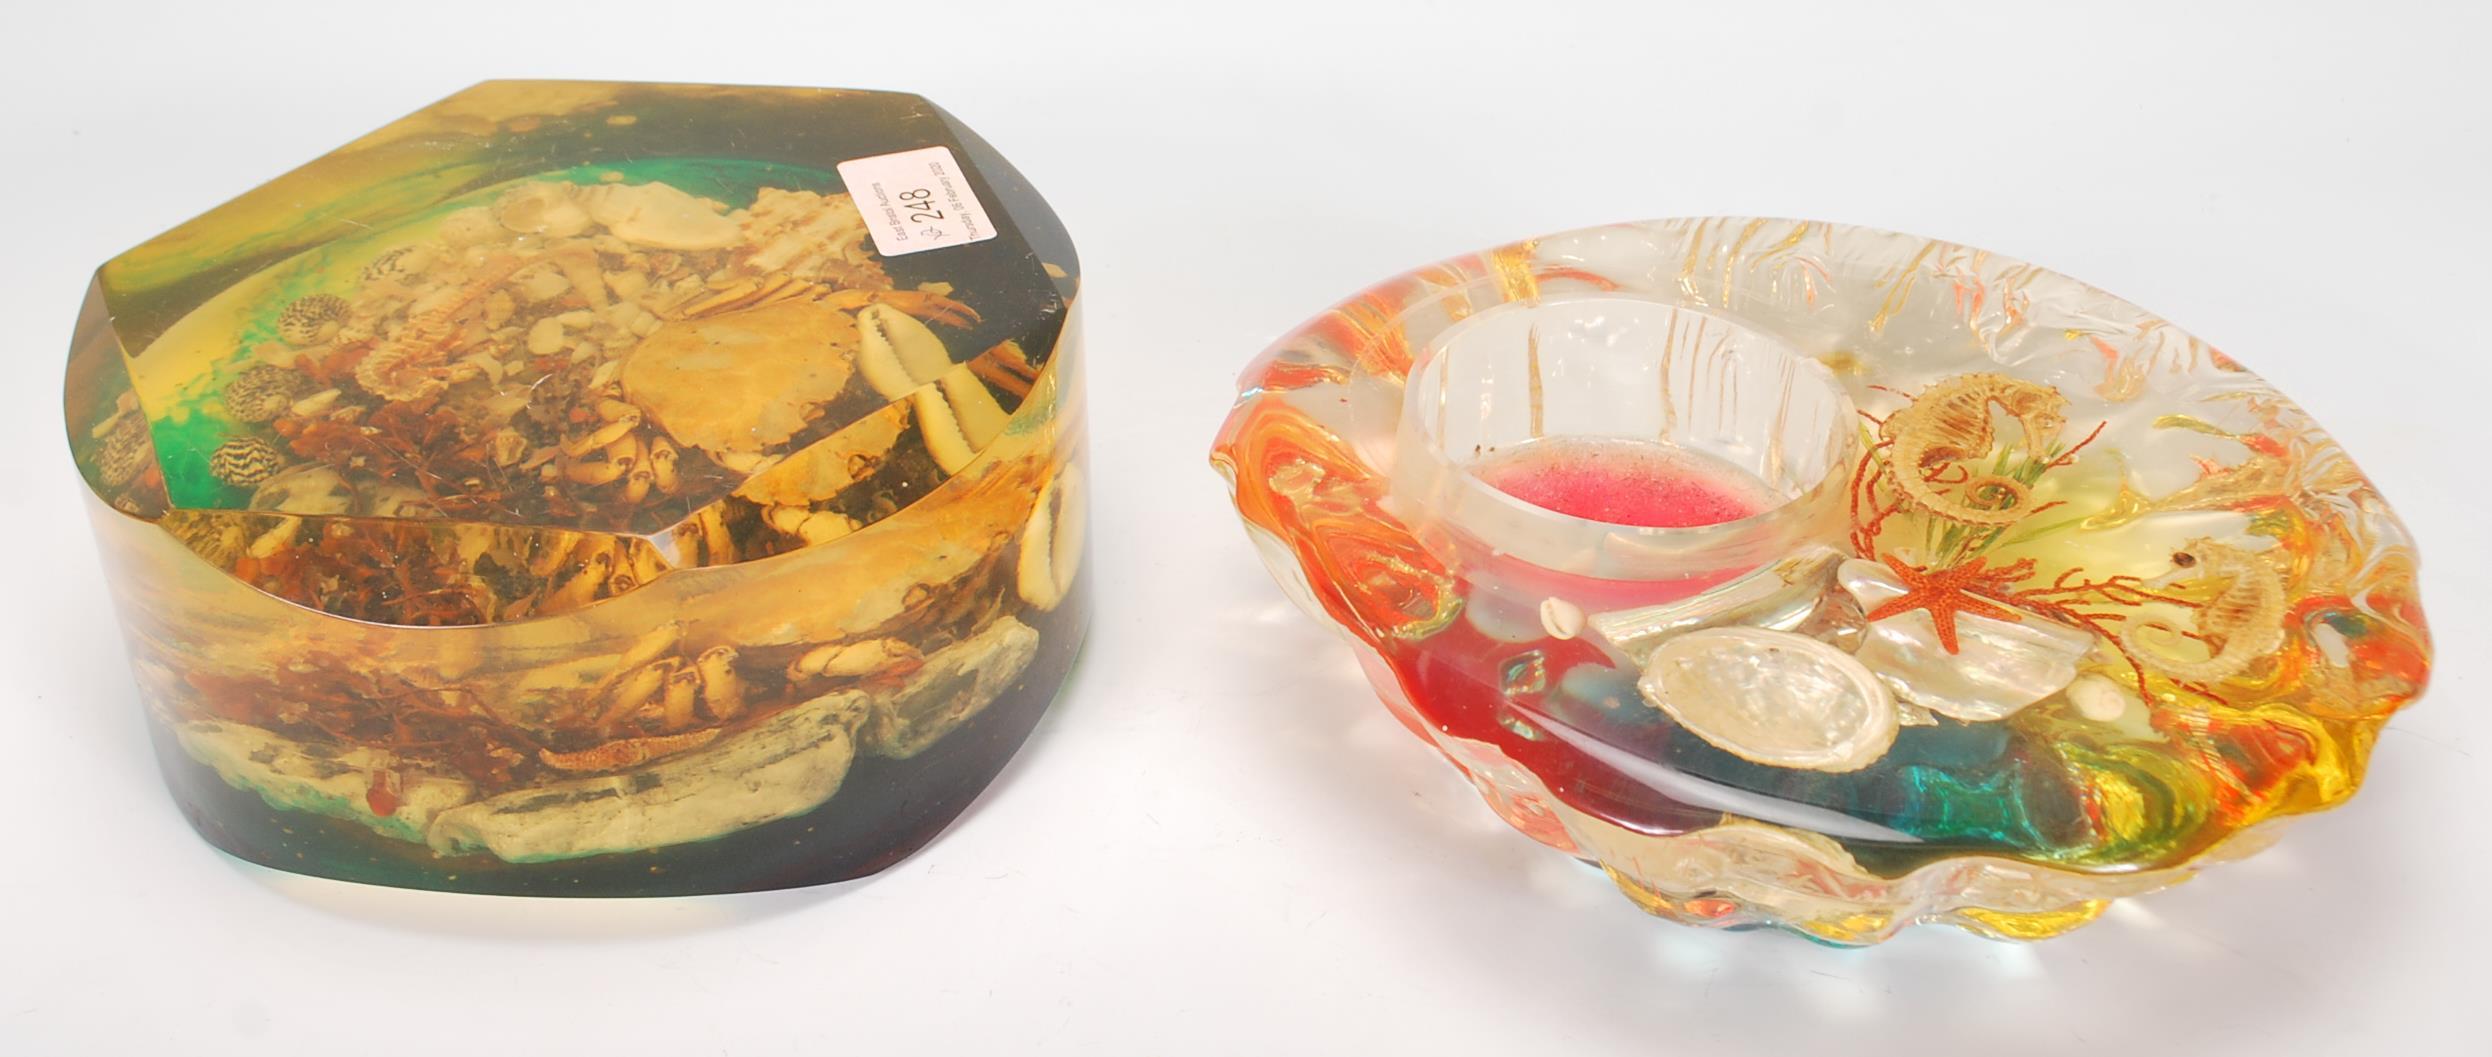 A pair of 1960's retro kitsch lucite large acrylic resin set marine / sea life paperweights with a